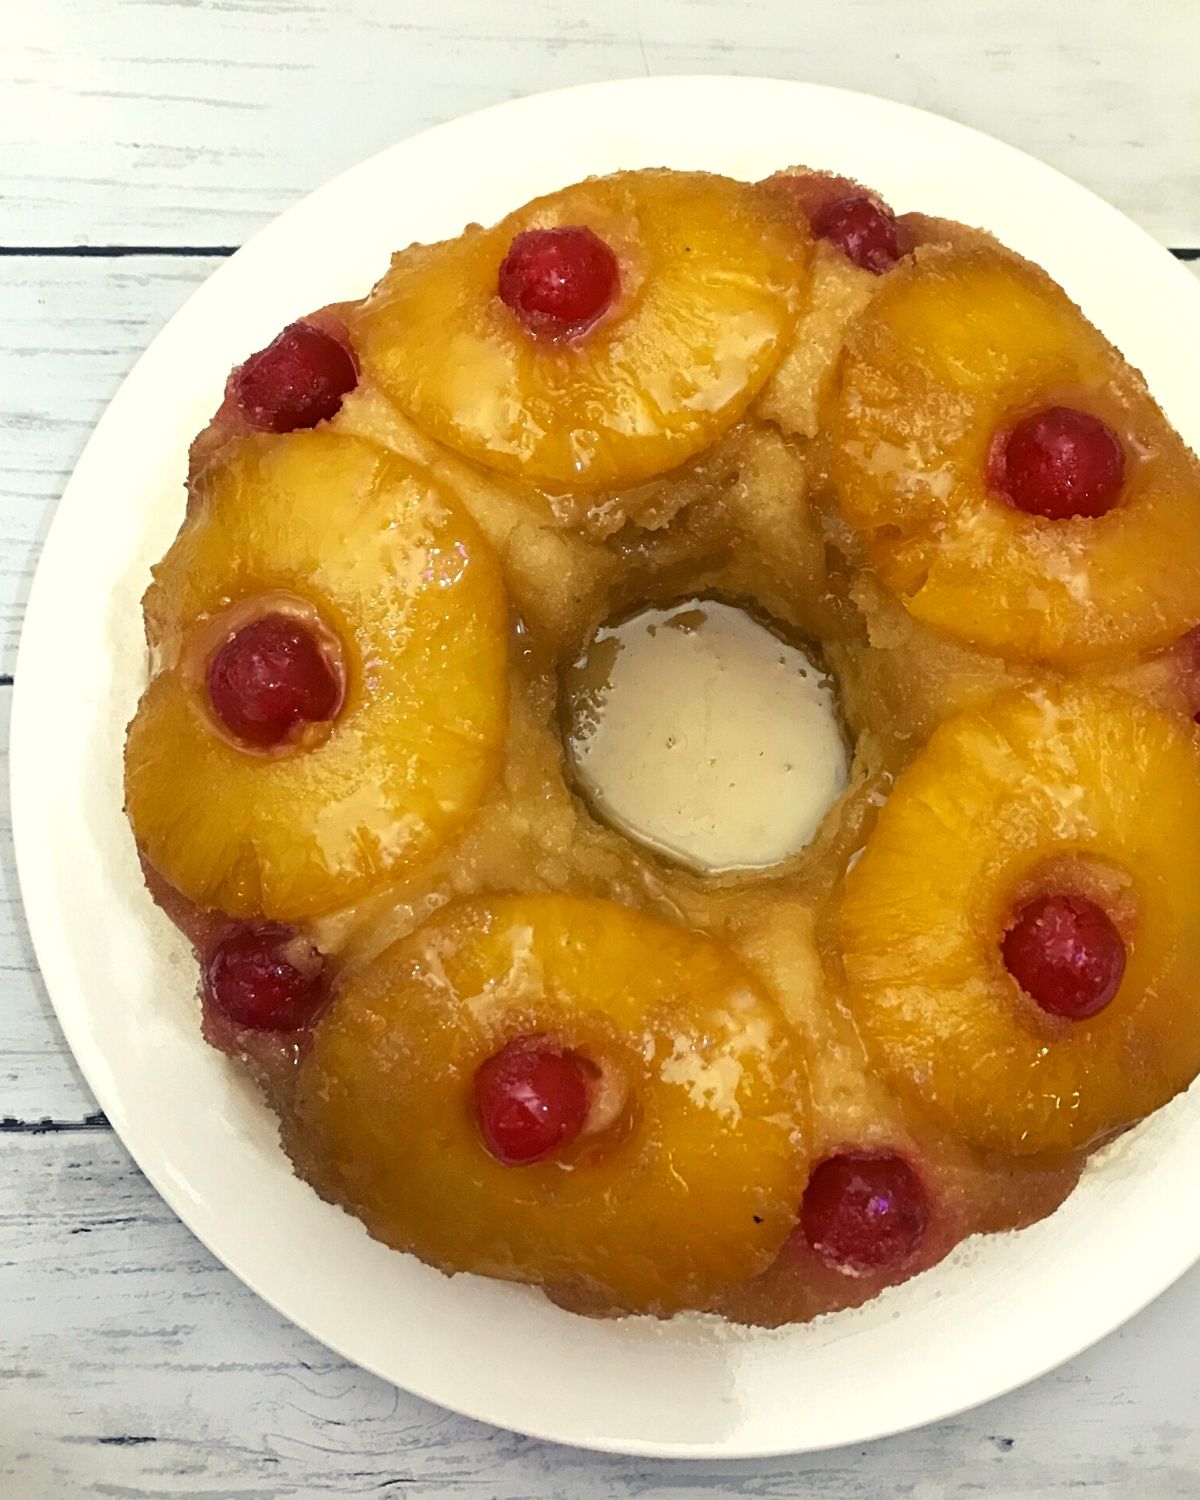 bundt pineapple upside down cake served in a white plate